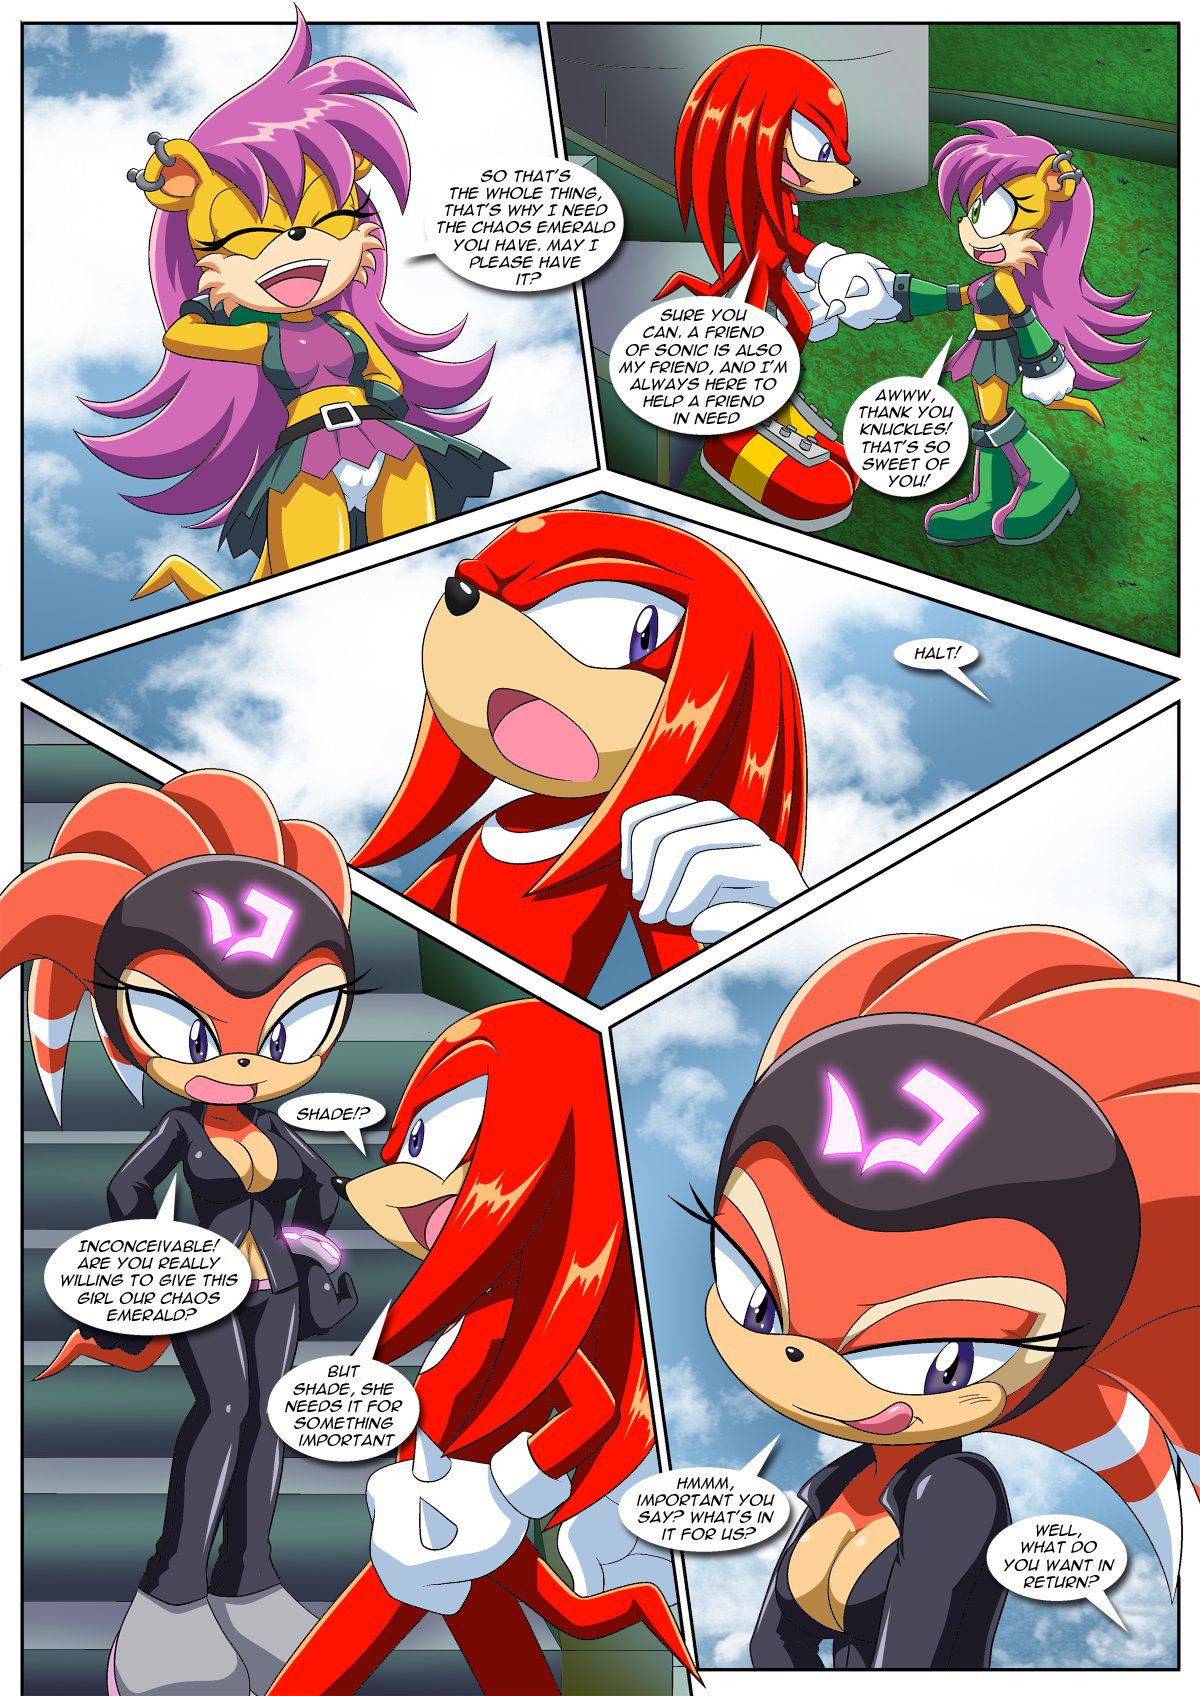 [Palcomix] Sonic Project XXX 4 (Sonic The Hedgehog) [Ongoing] 11